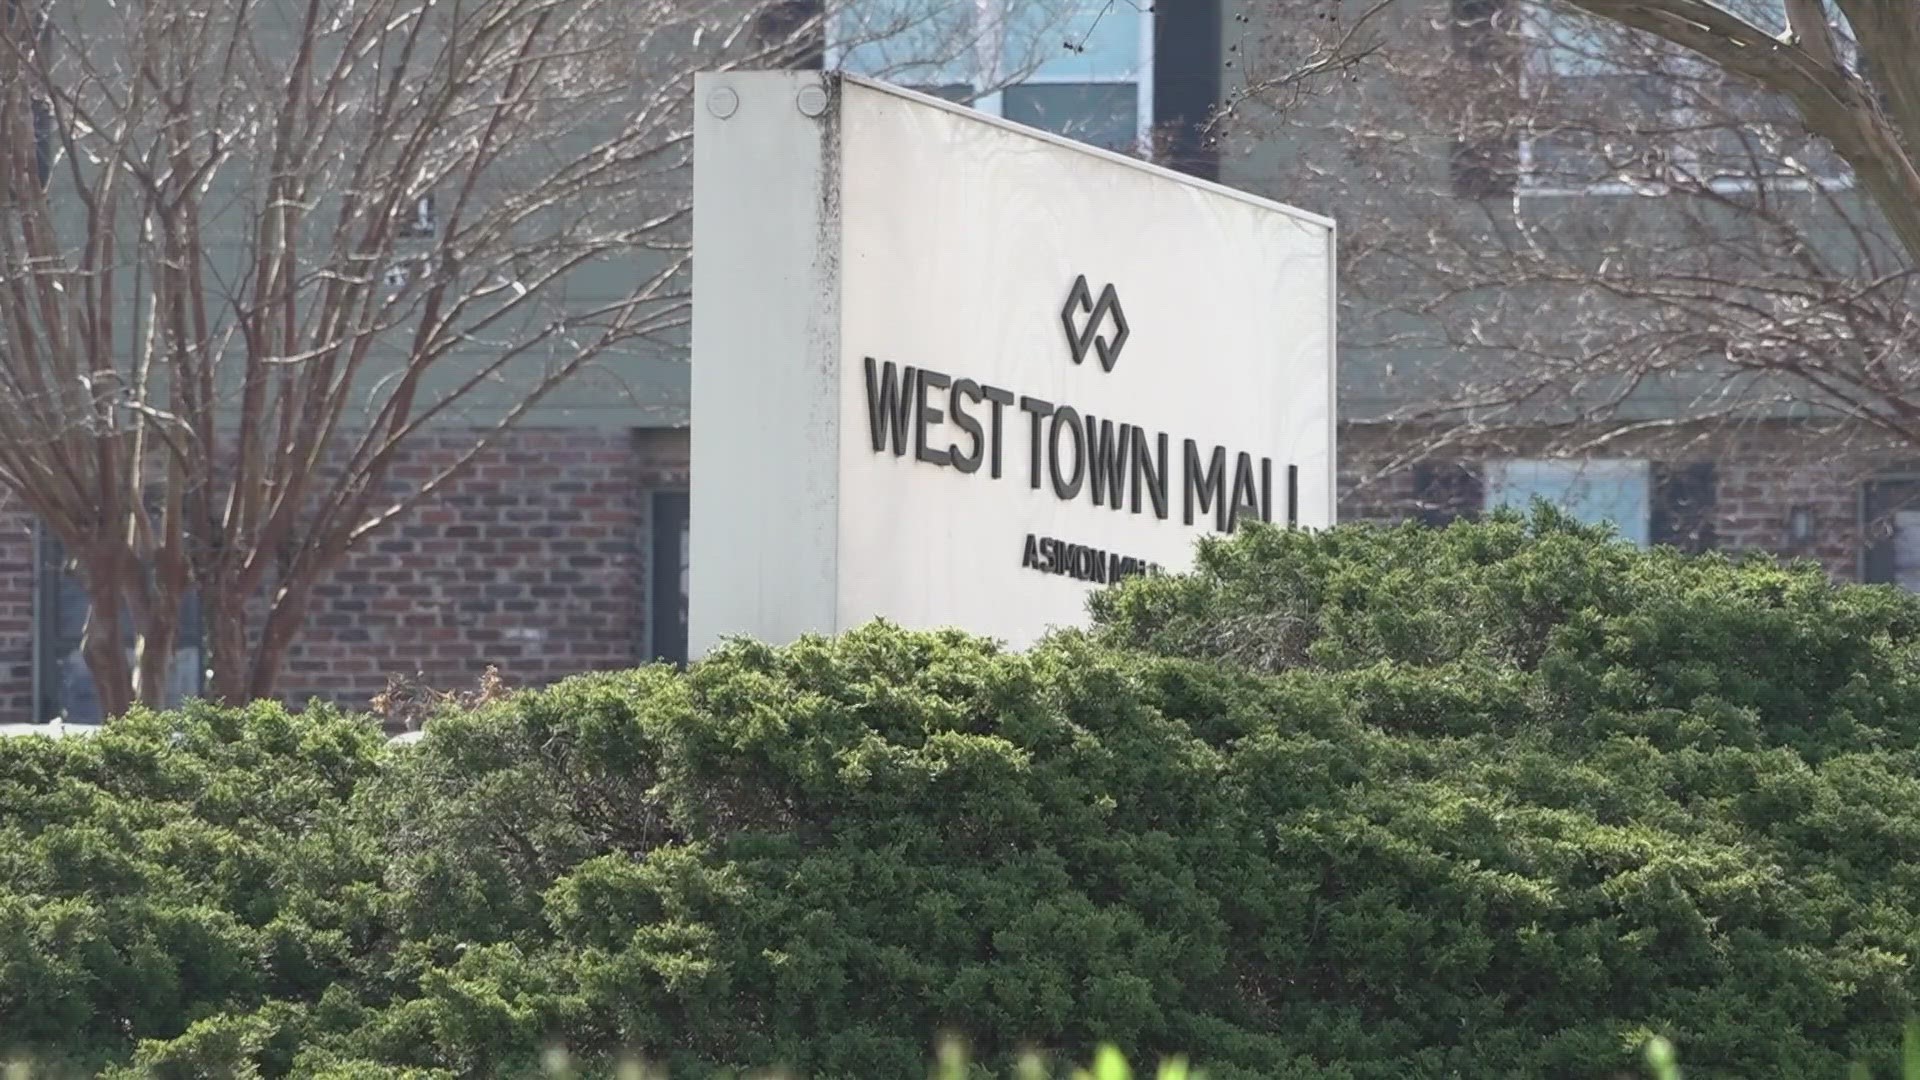 A fourth teenager is under arrest after shots were fired near West Town Mall.